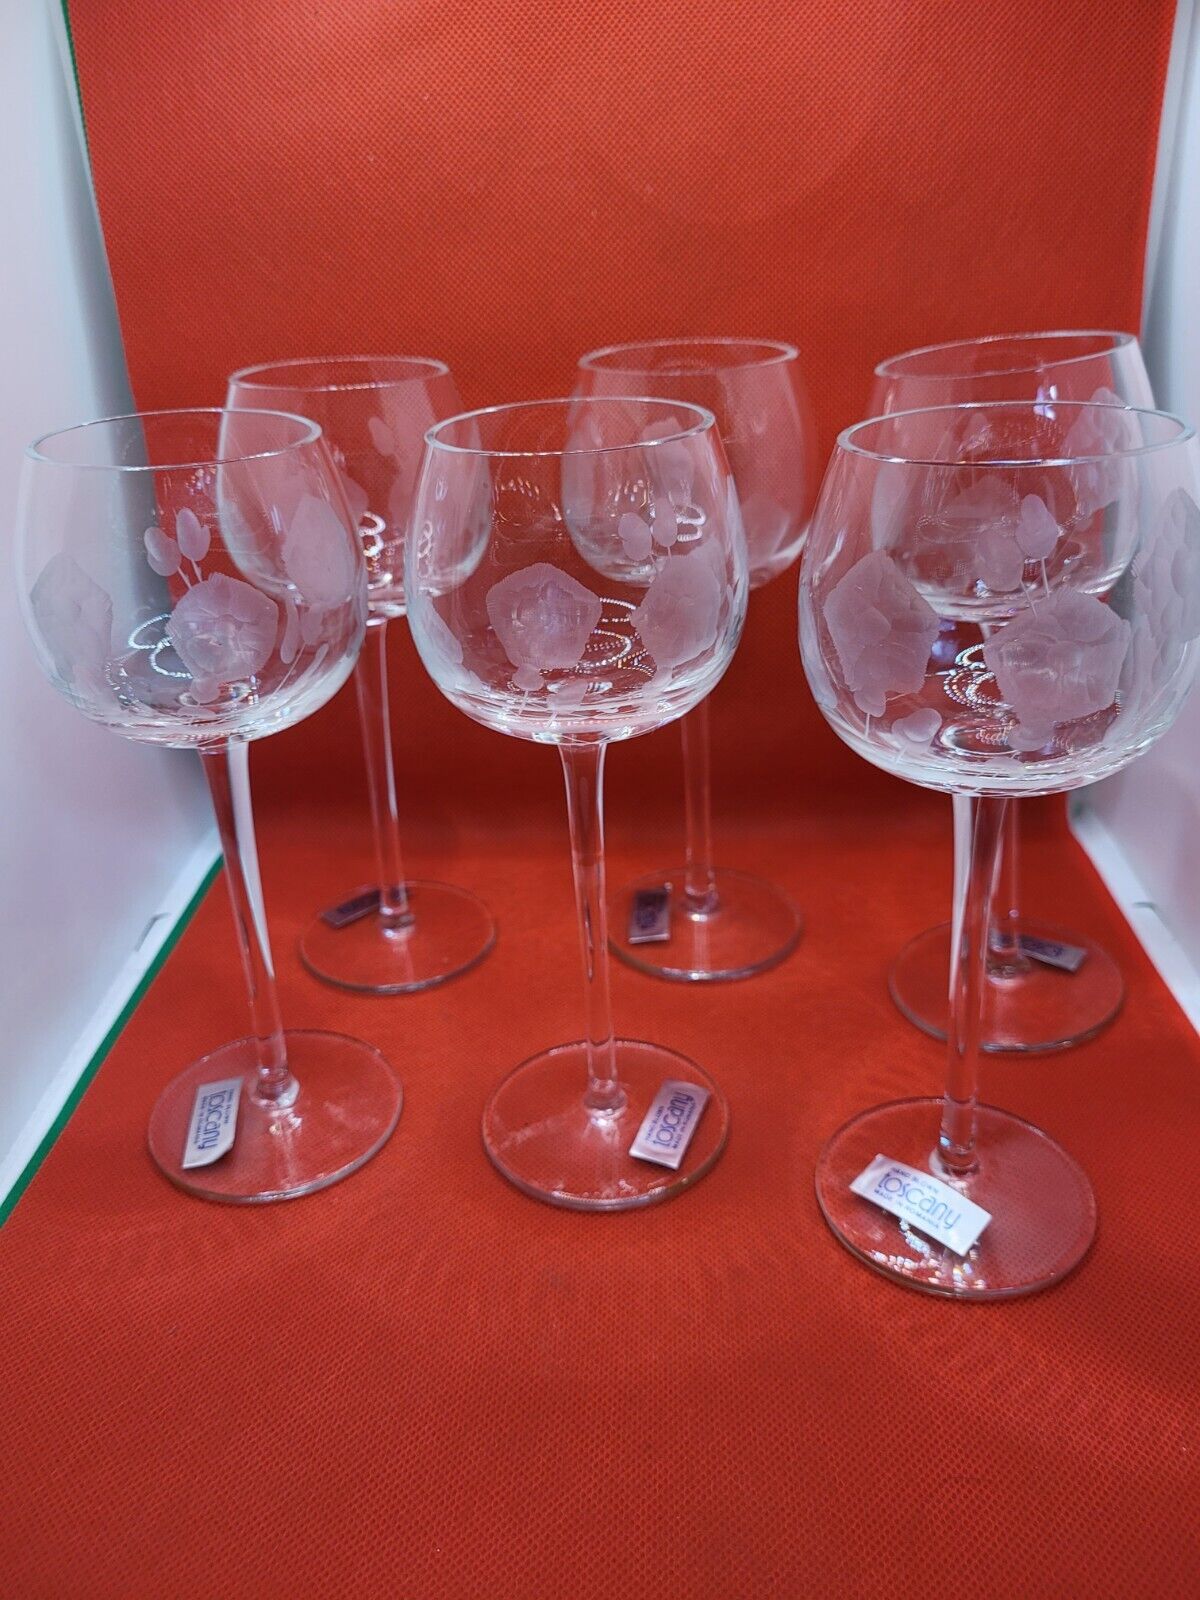 Vintage Toscany etched Liquor apertif Glasses NWT set of 6 made in romania